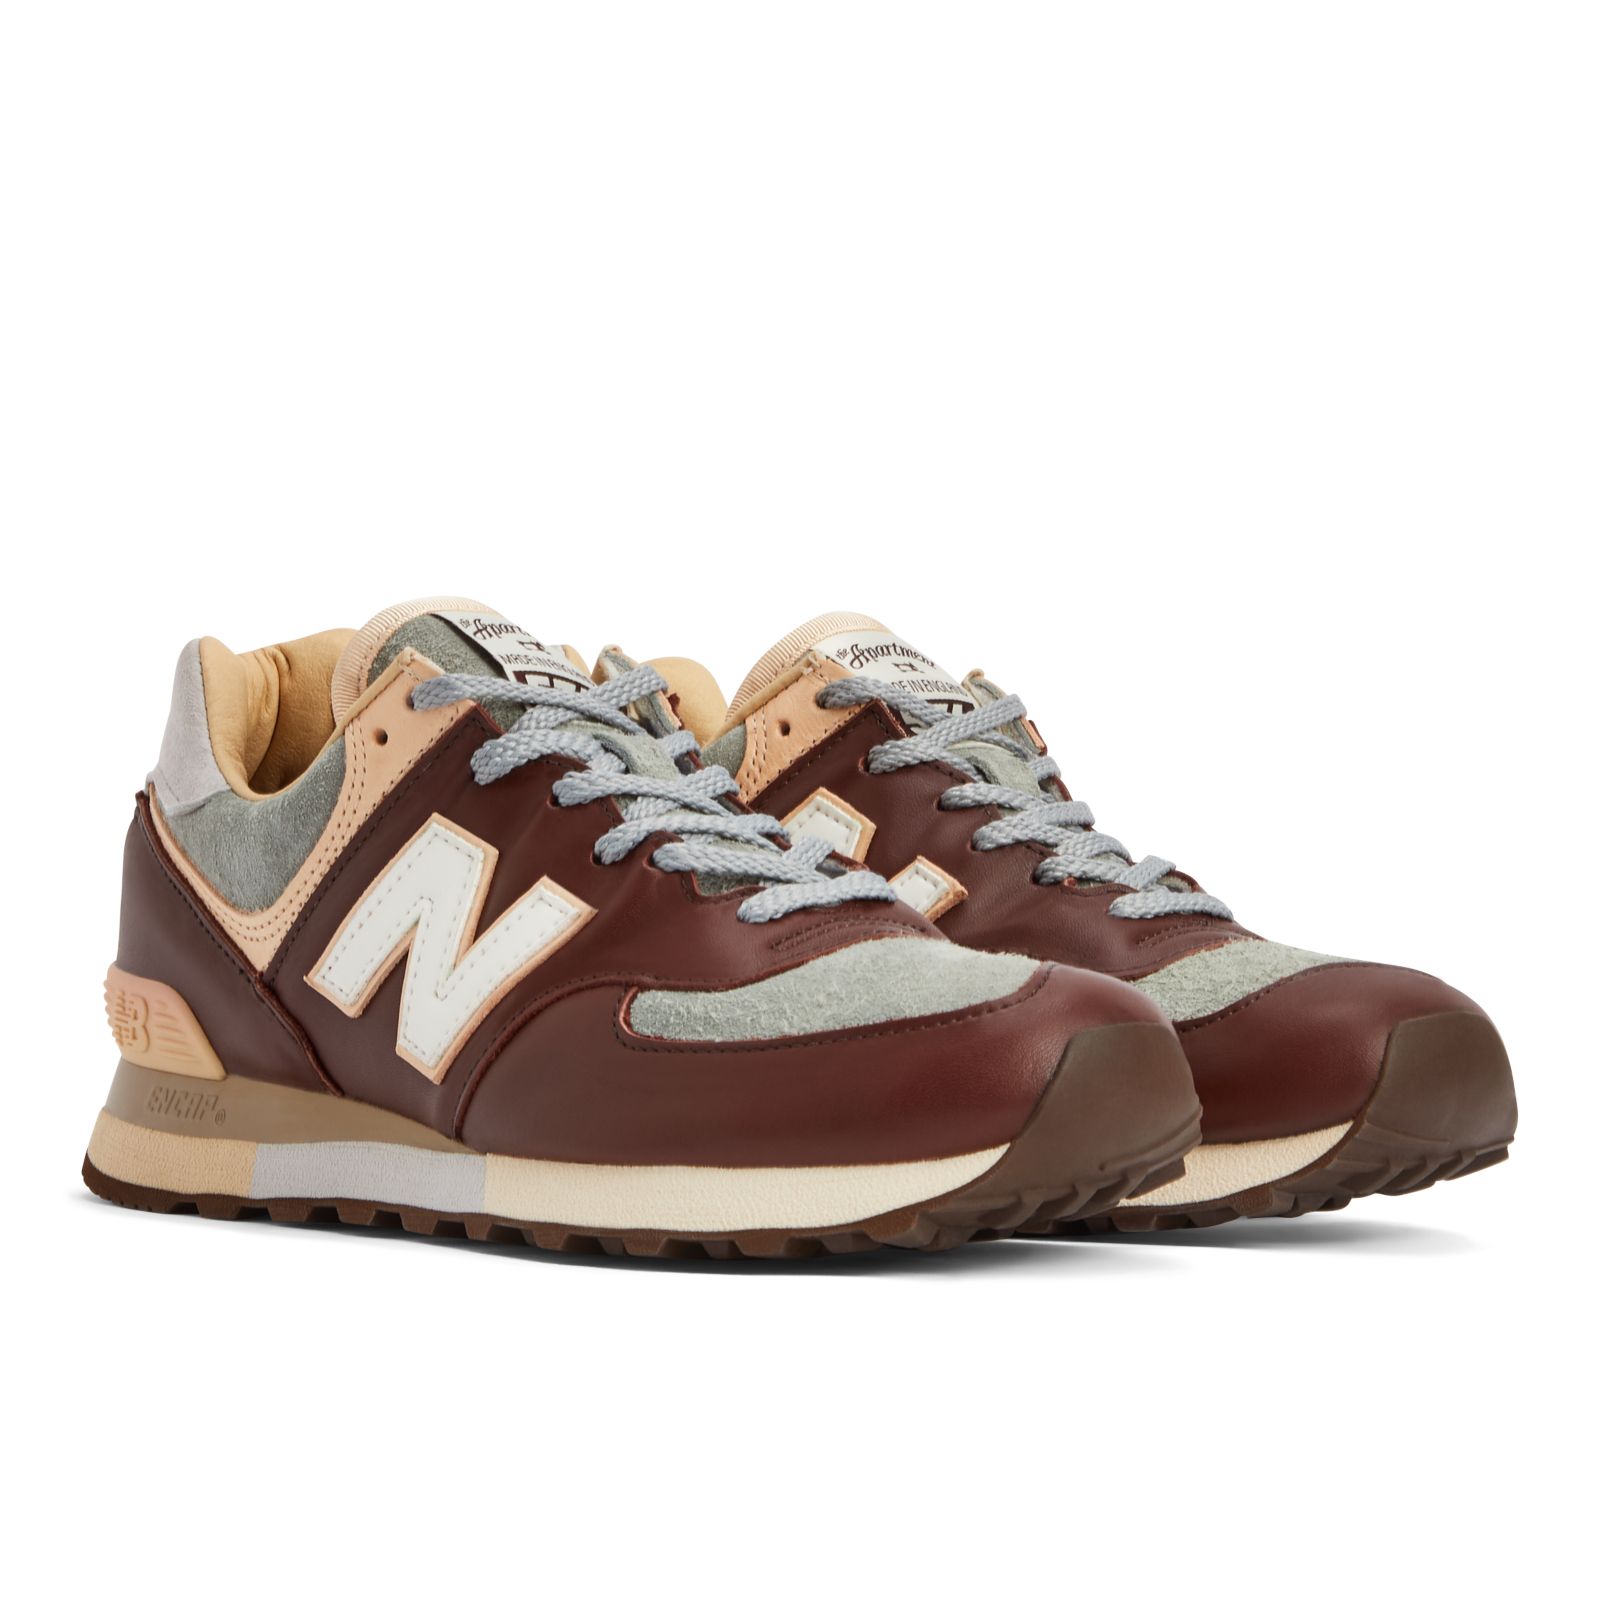 The Apartment x New Balance MADE in UK 576